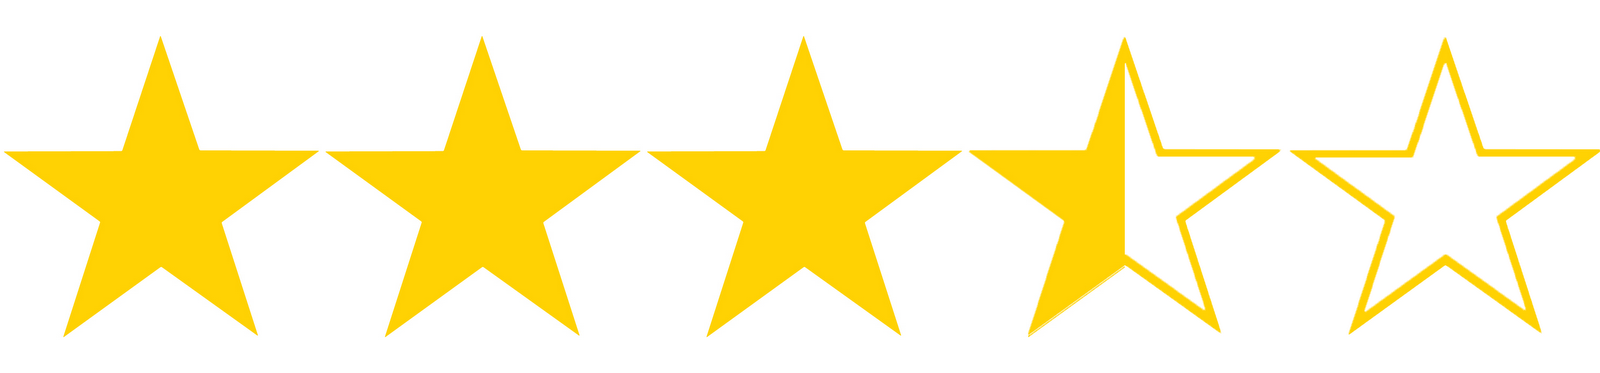 Rating Star Png Photo 1 5 Star Rating - Clip Art Library